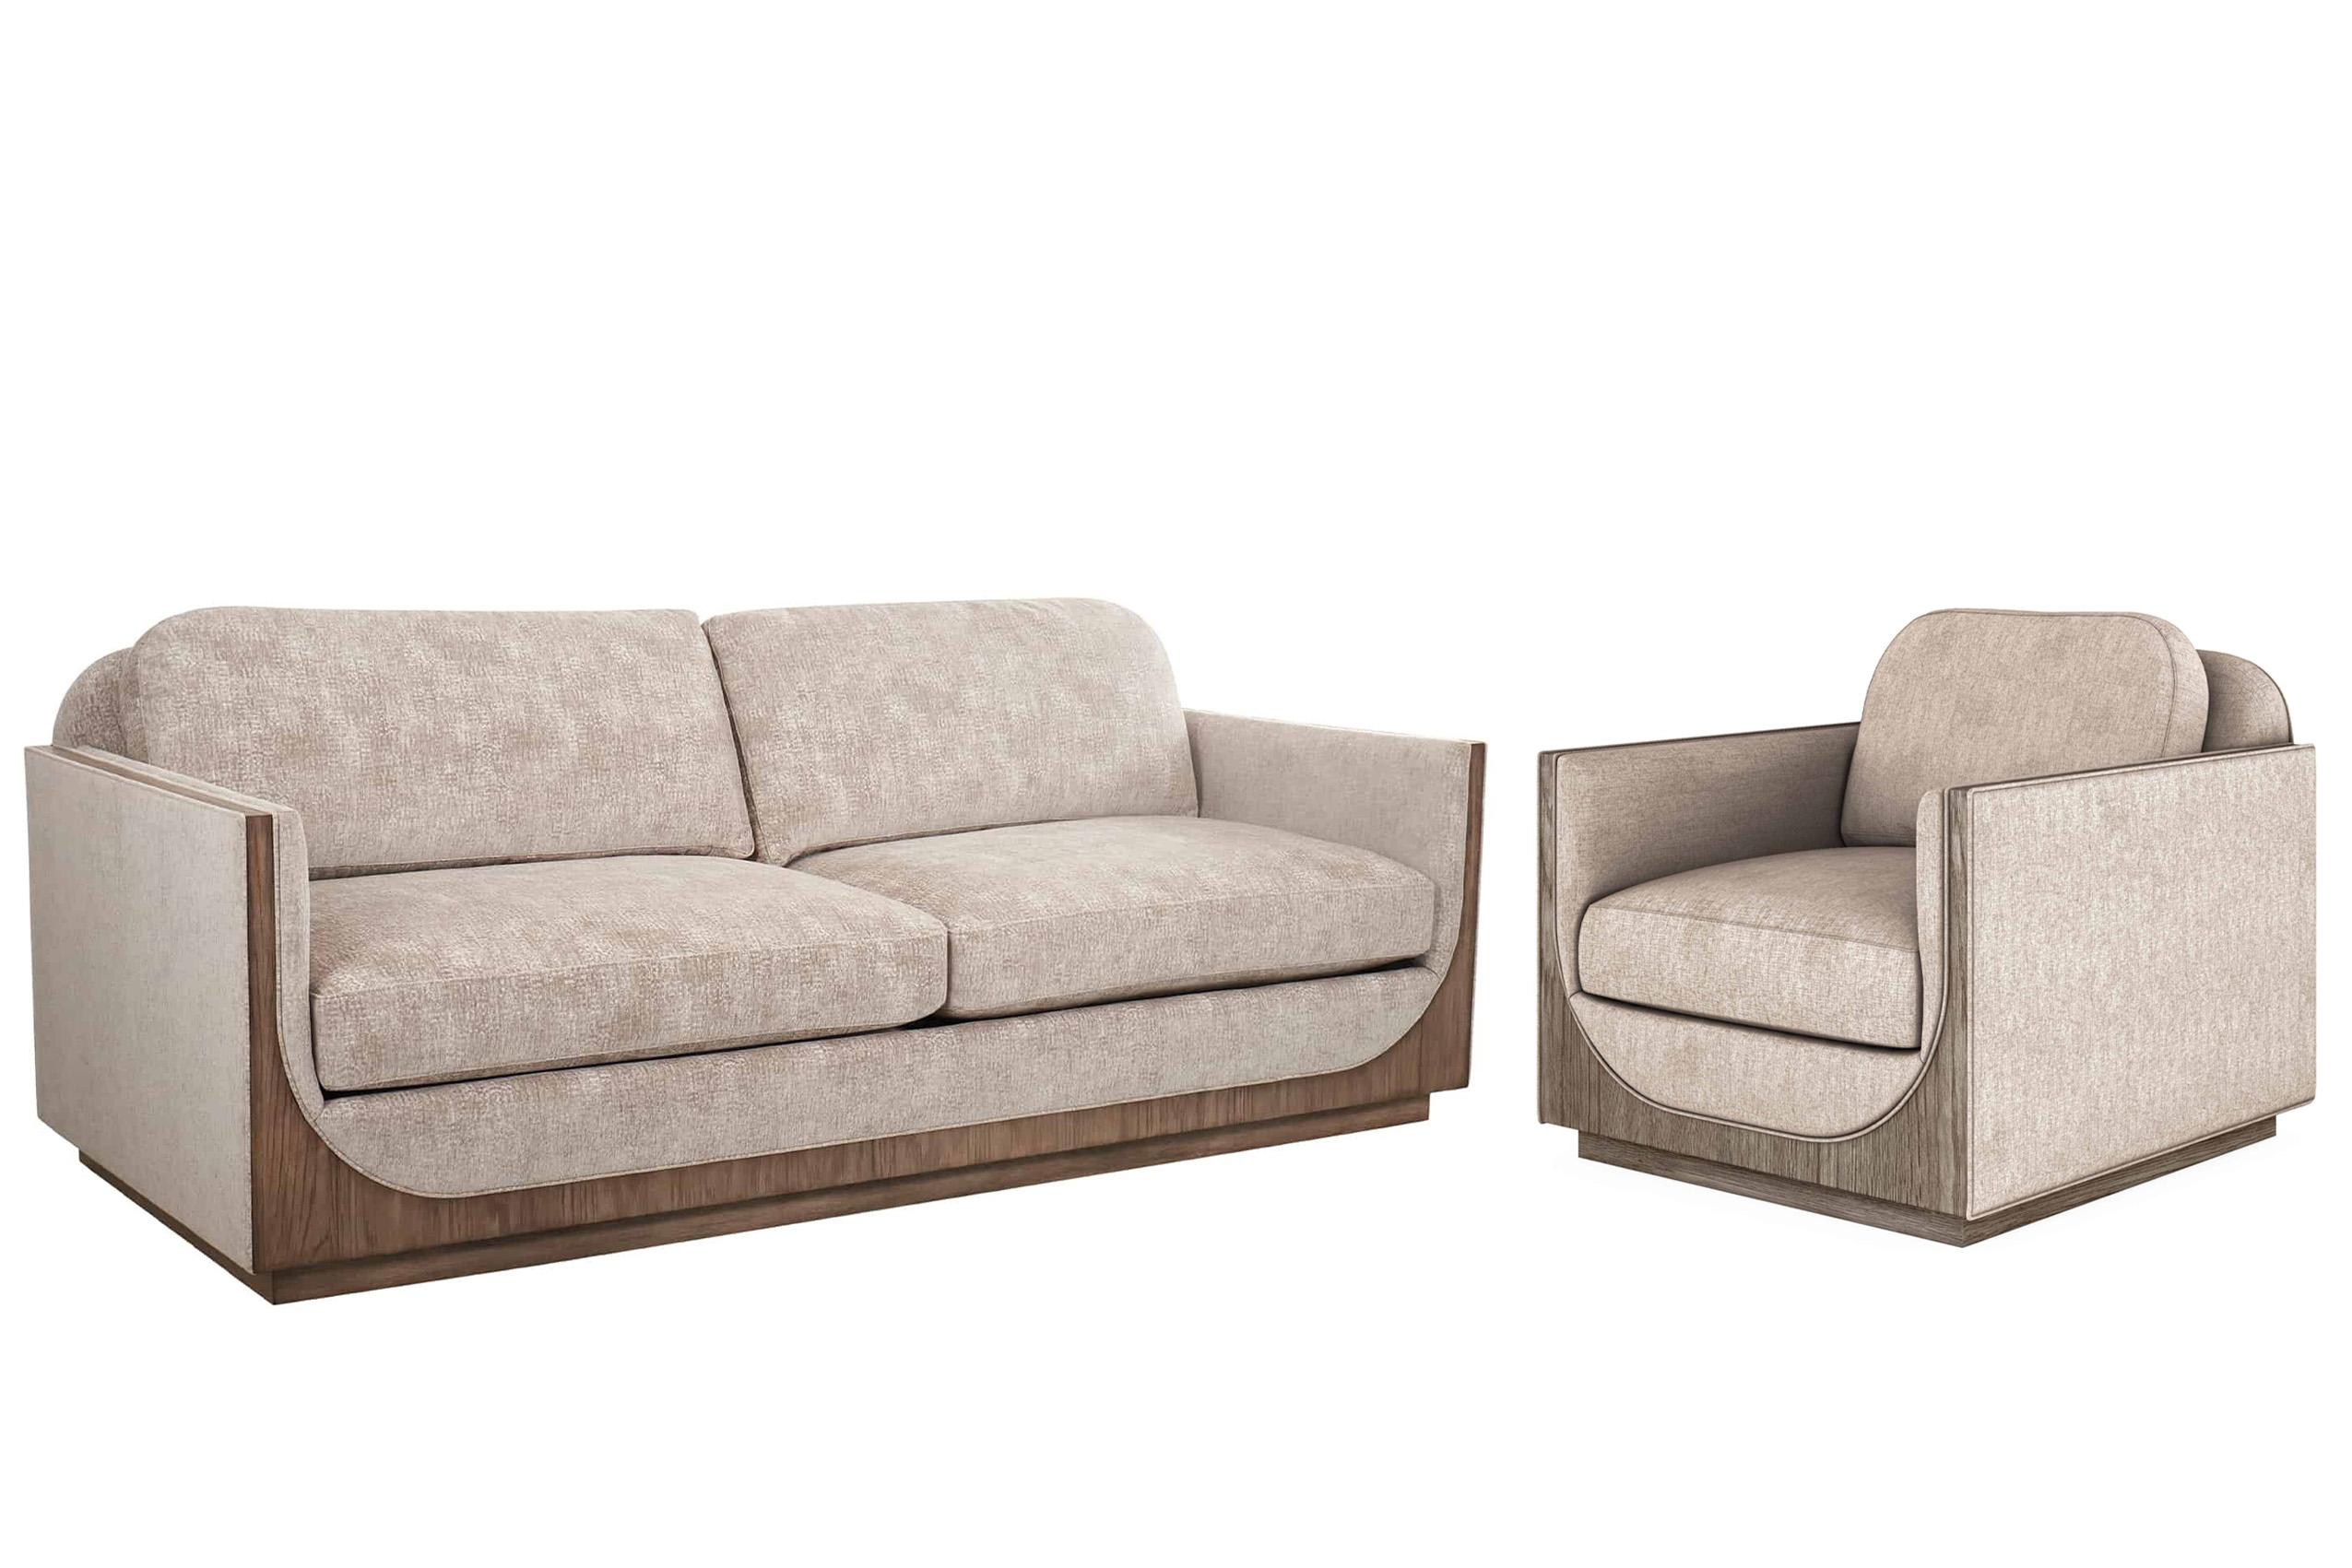 Contemporary, Modern, Casual Sofa BASTION 763501-5354FN 763501-5354FN-Set-2 in Silver Fabric